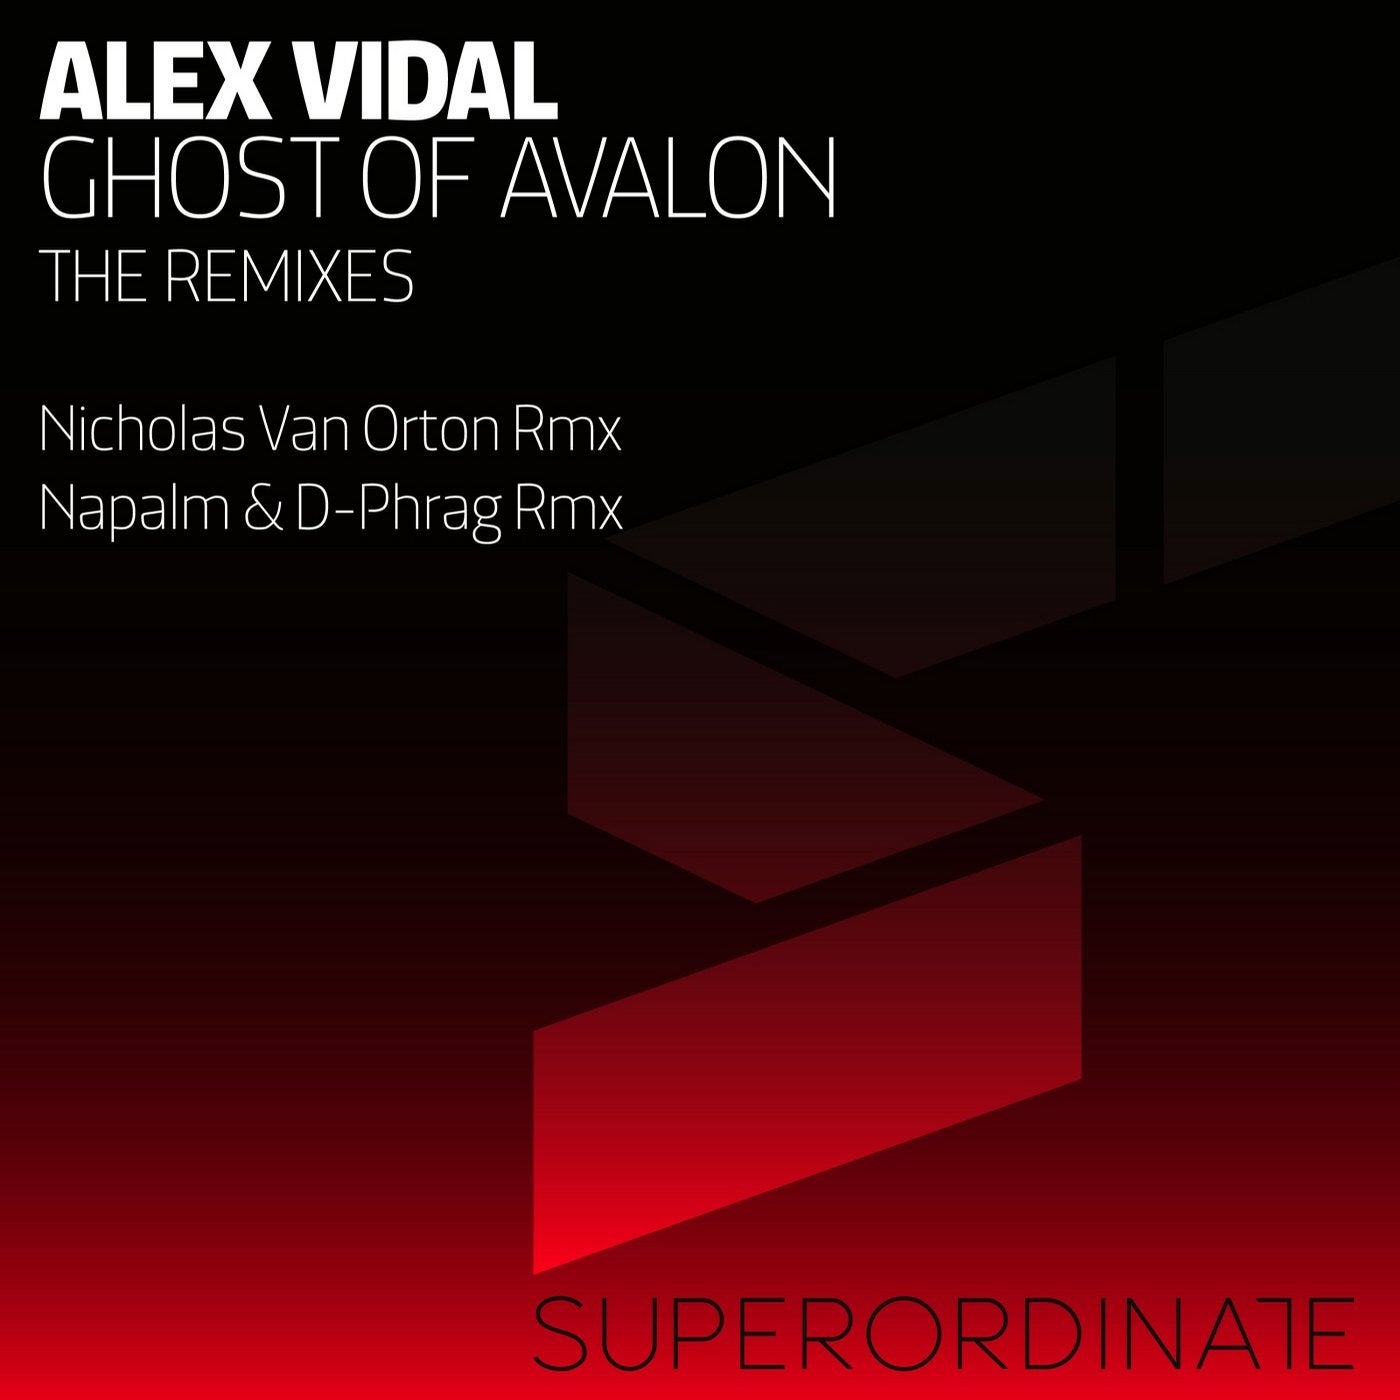 Ghost of Avalon the Remixes